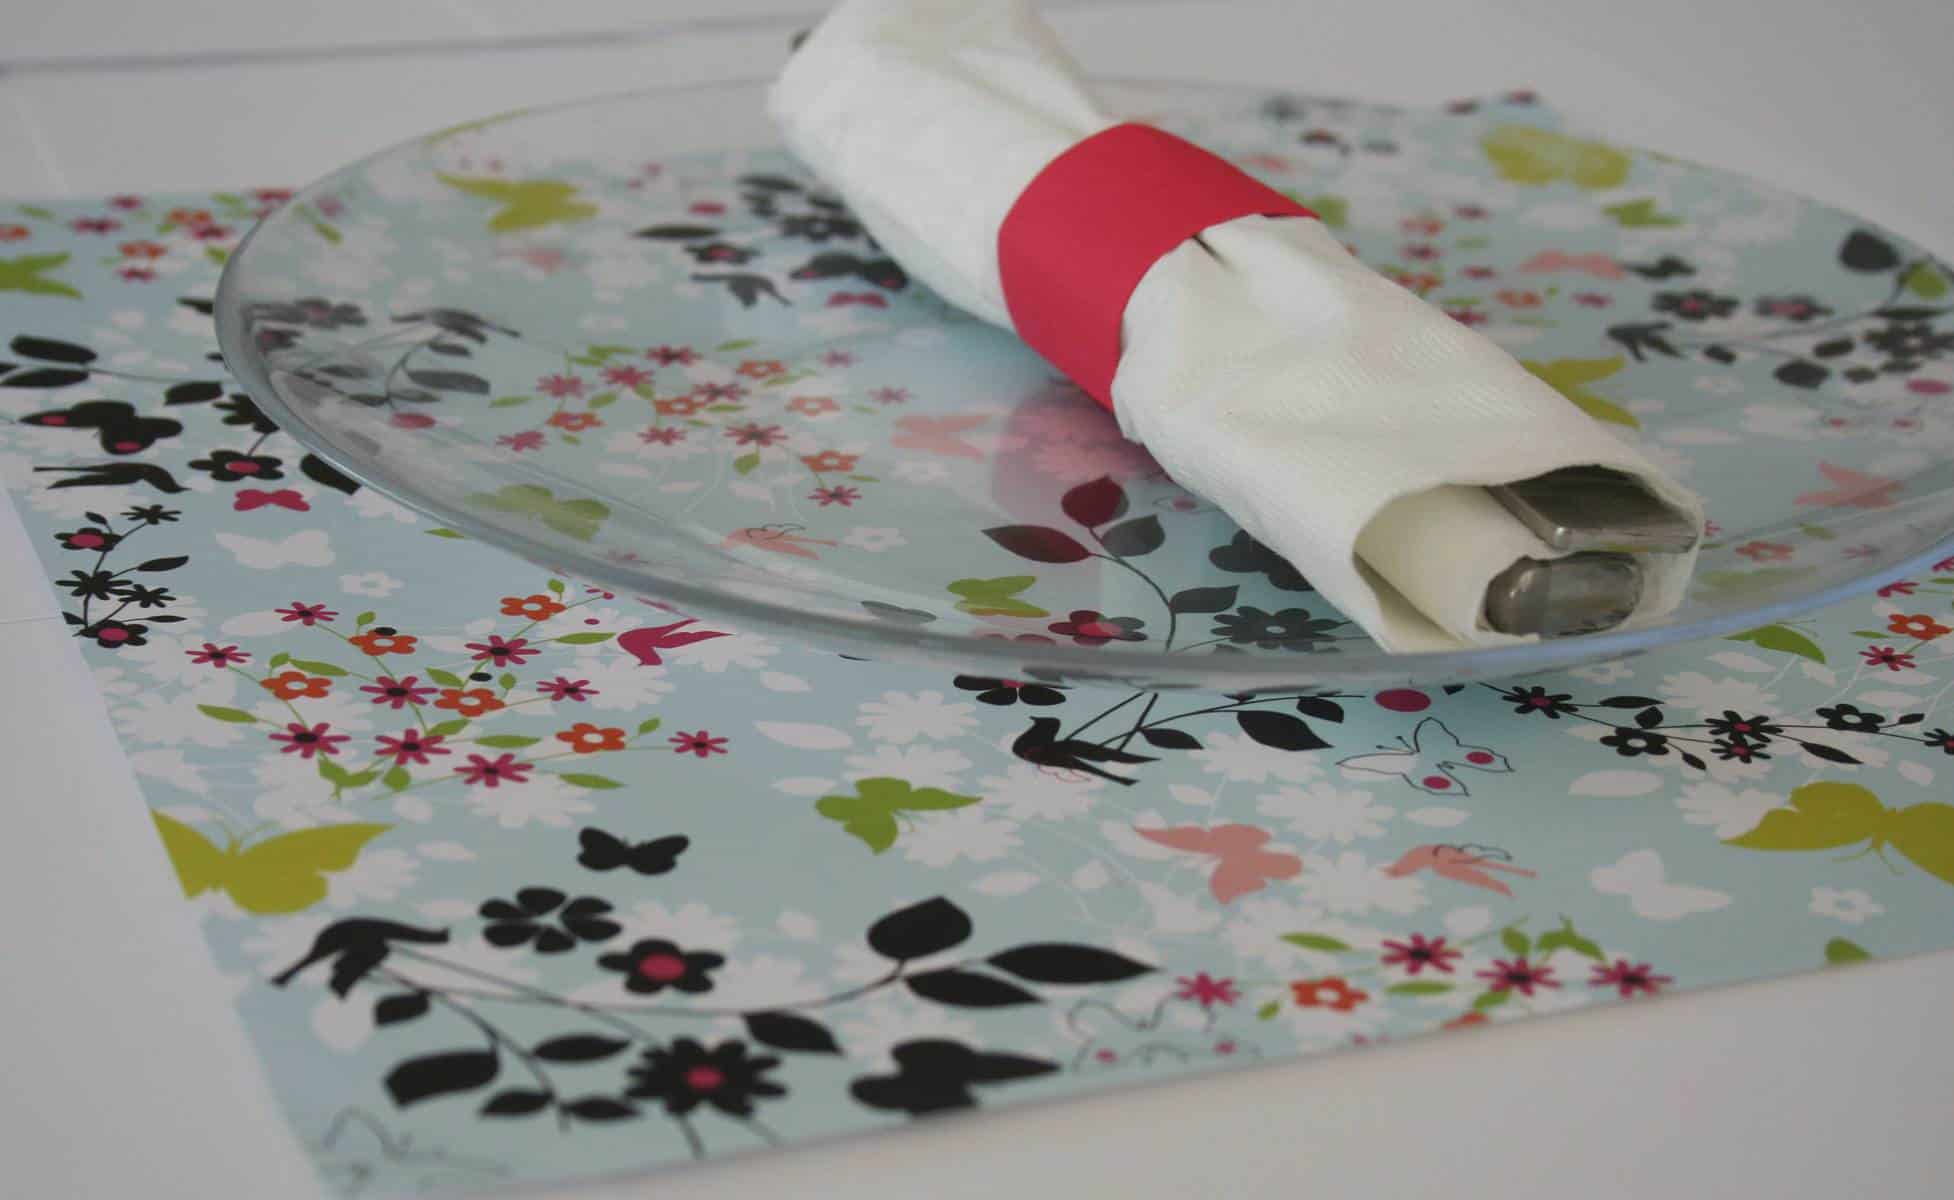 diy-placemats-using-paper-thoughtfully-simple